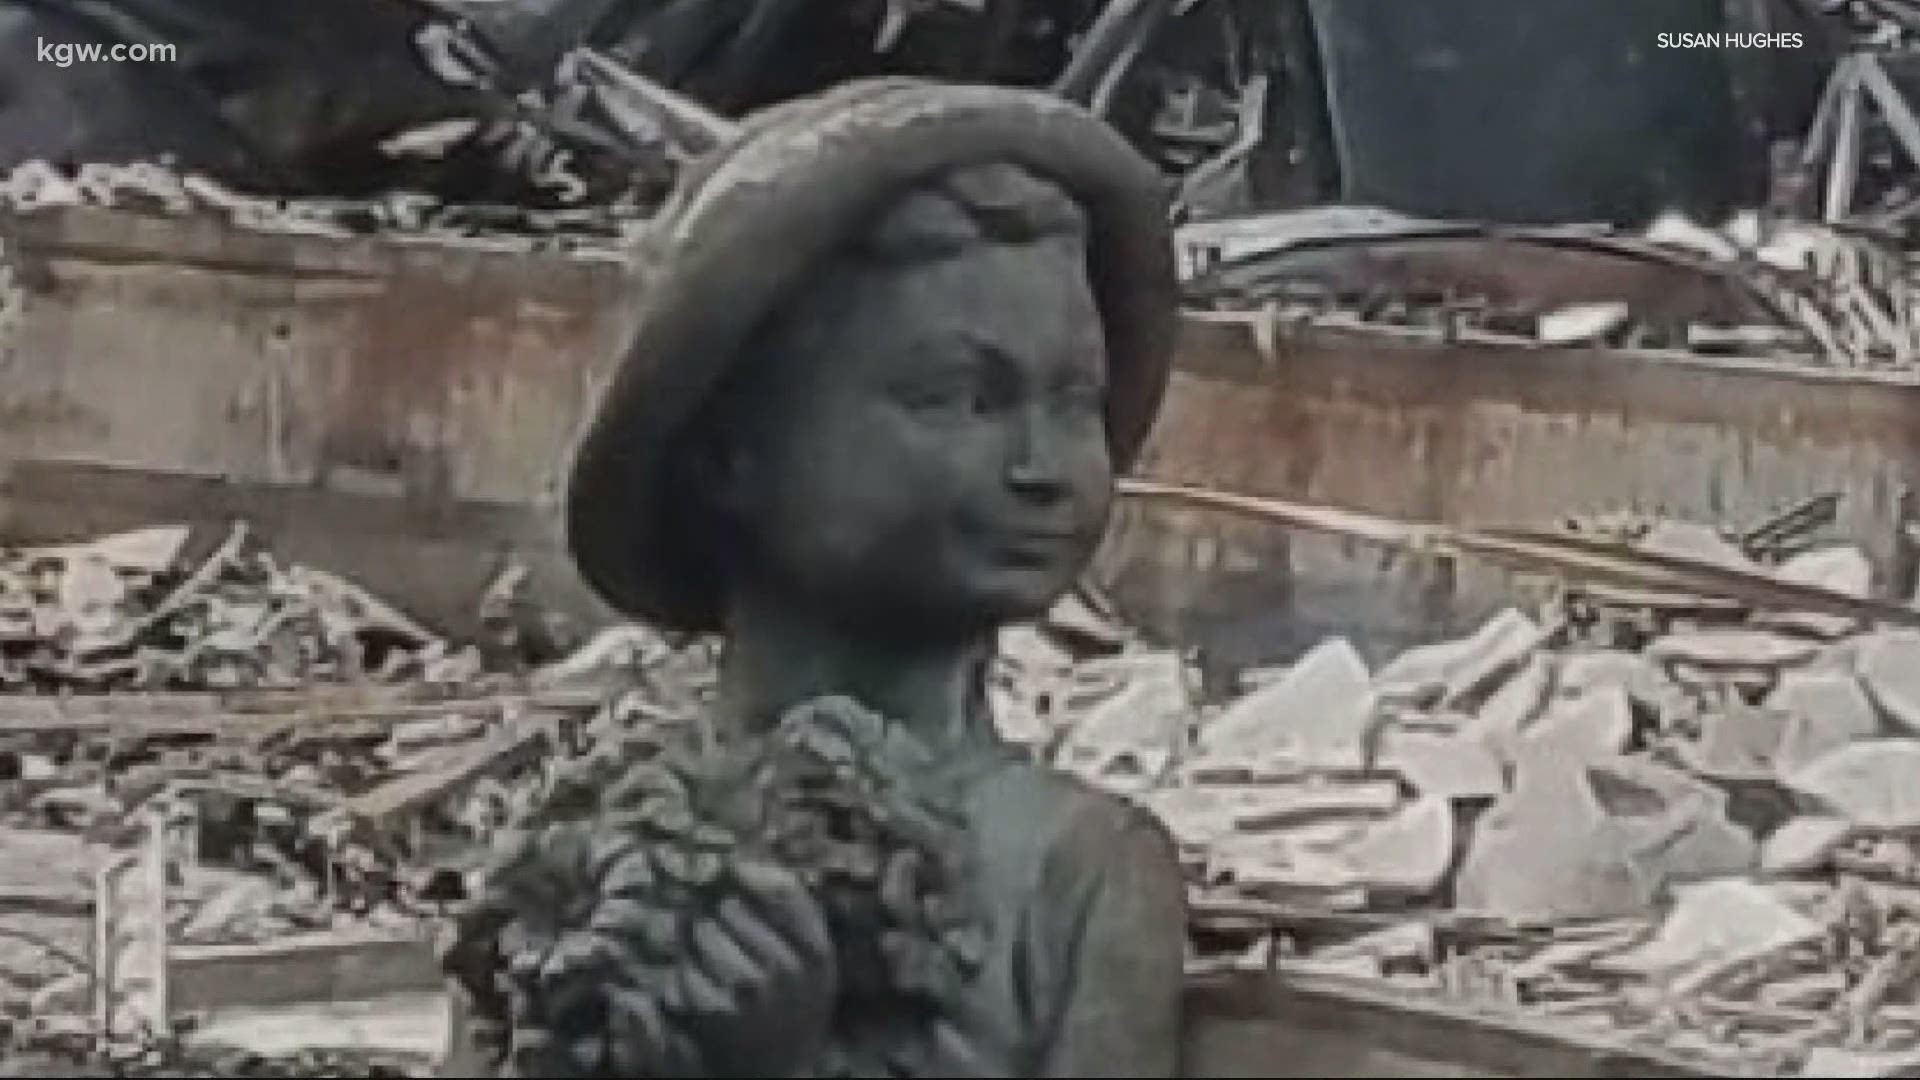 The statue became a symbol of hope for the homeowners, but now it is missing.